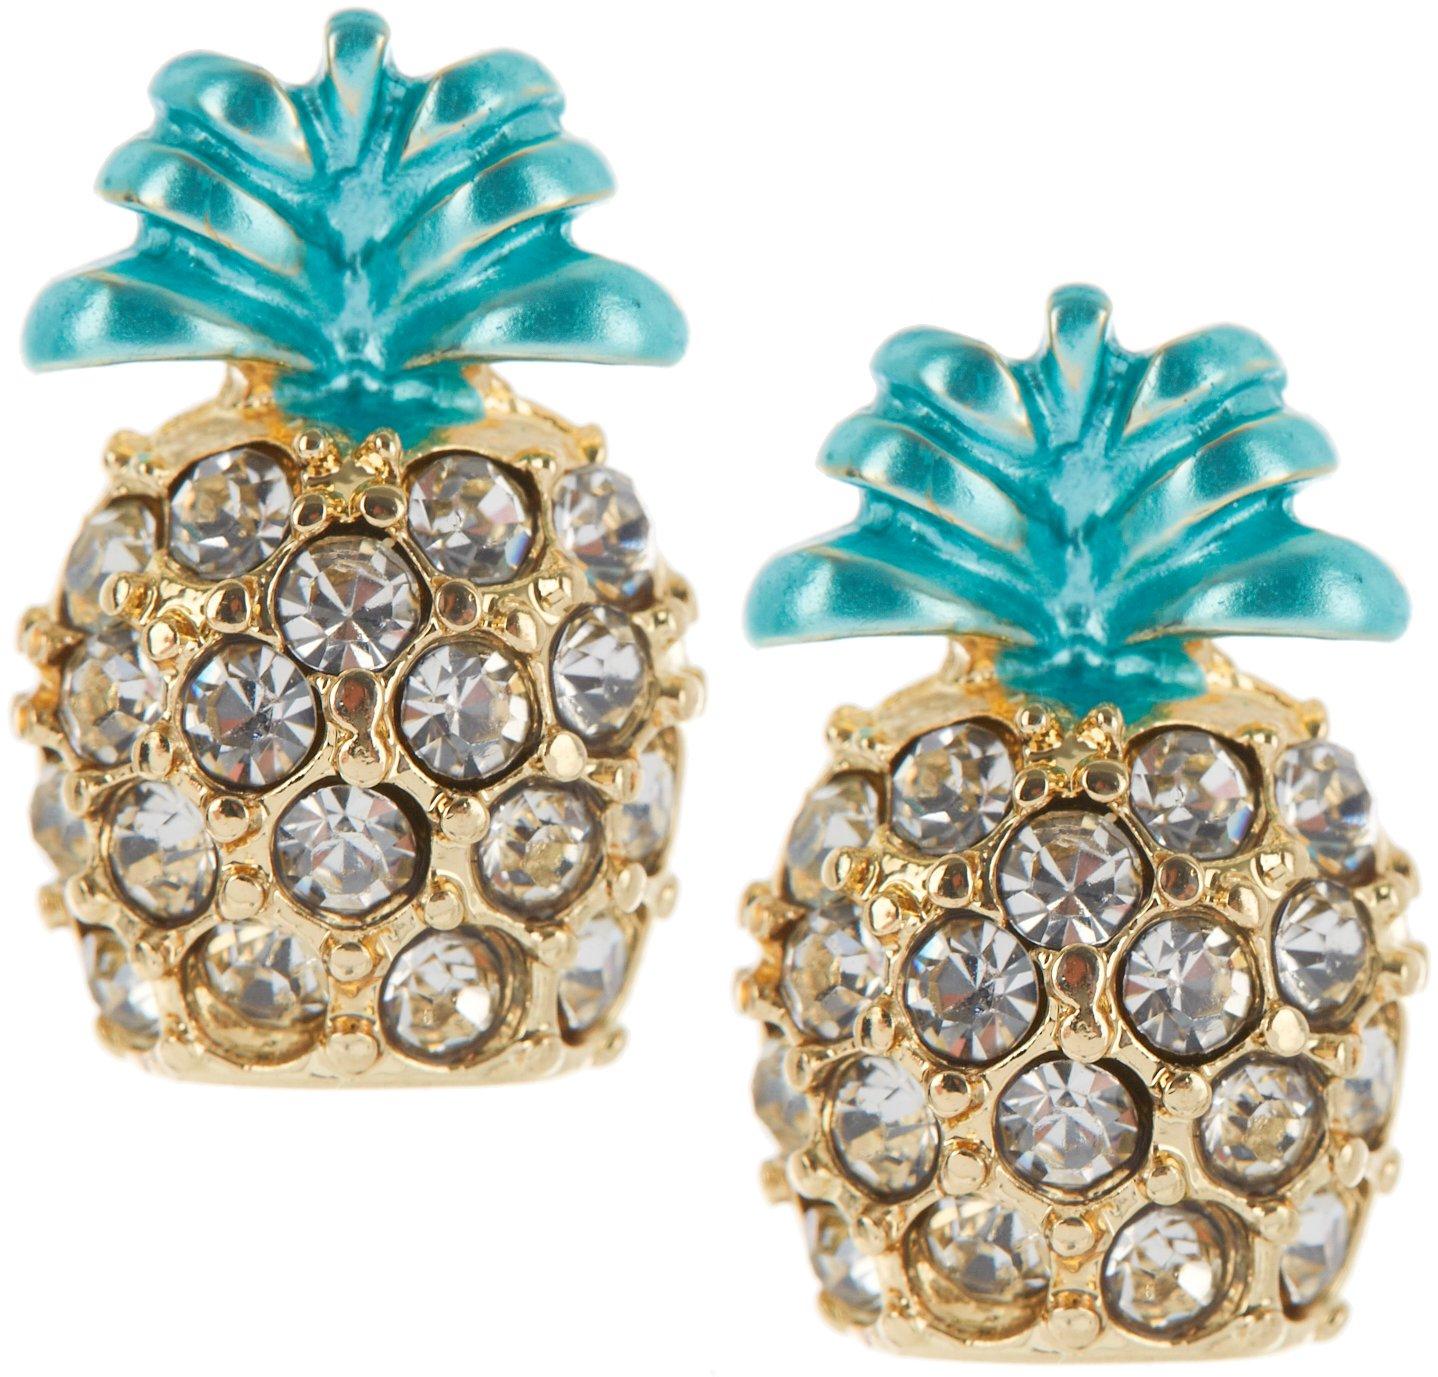 Beach Chic .75 In. Pave Pineapple Gold Tone Stud Earrings